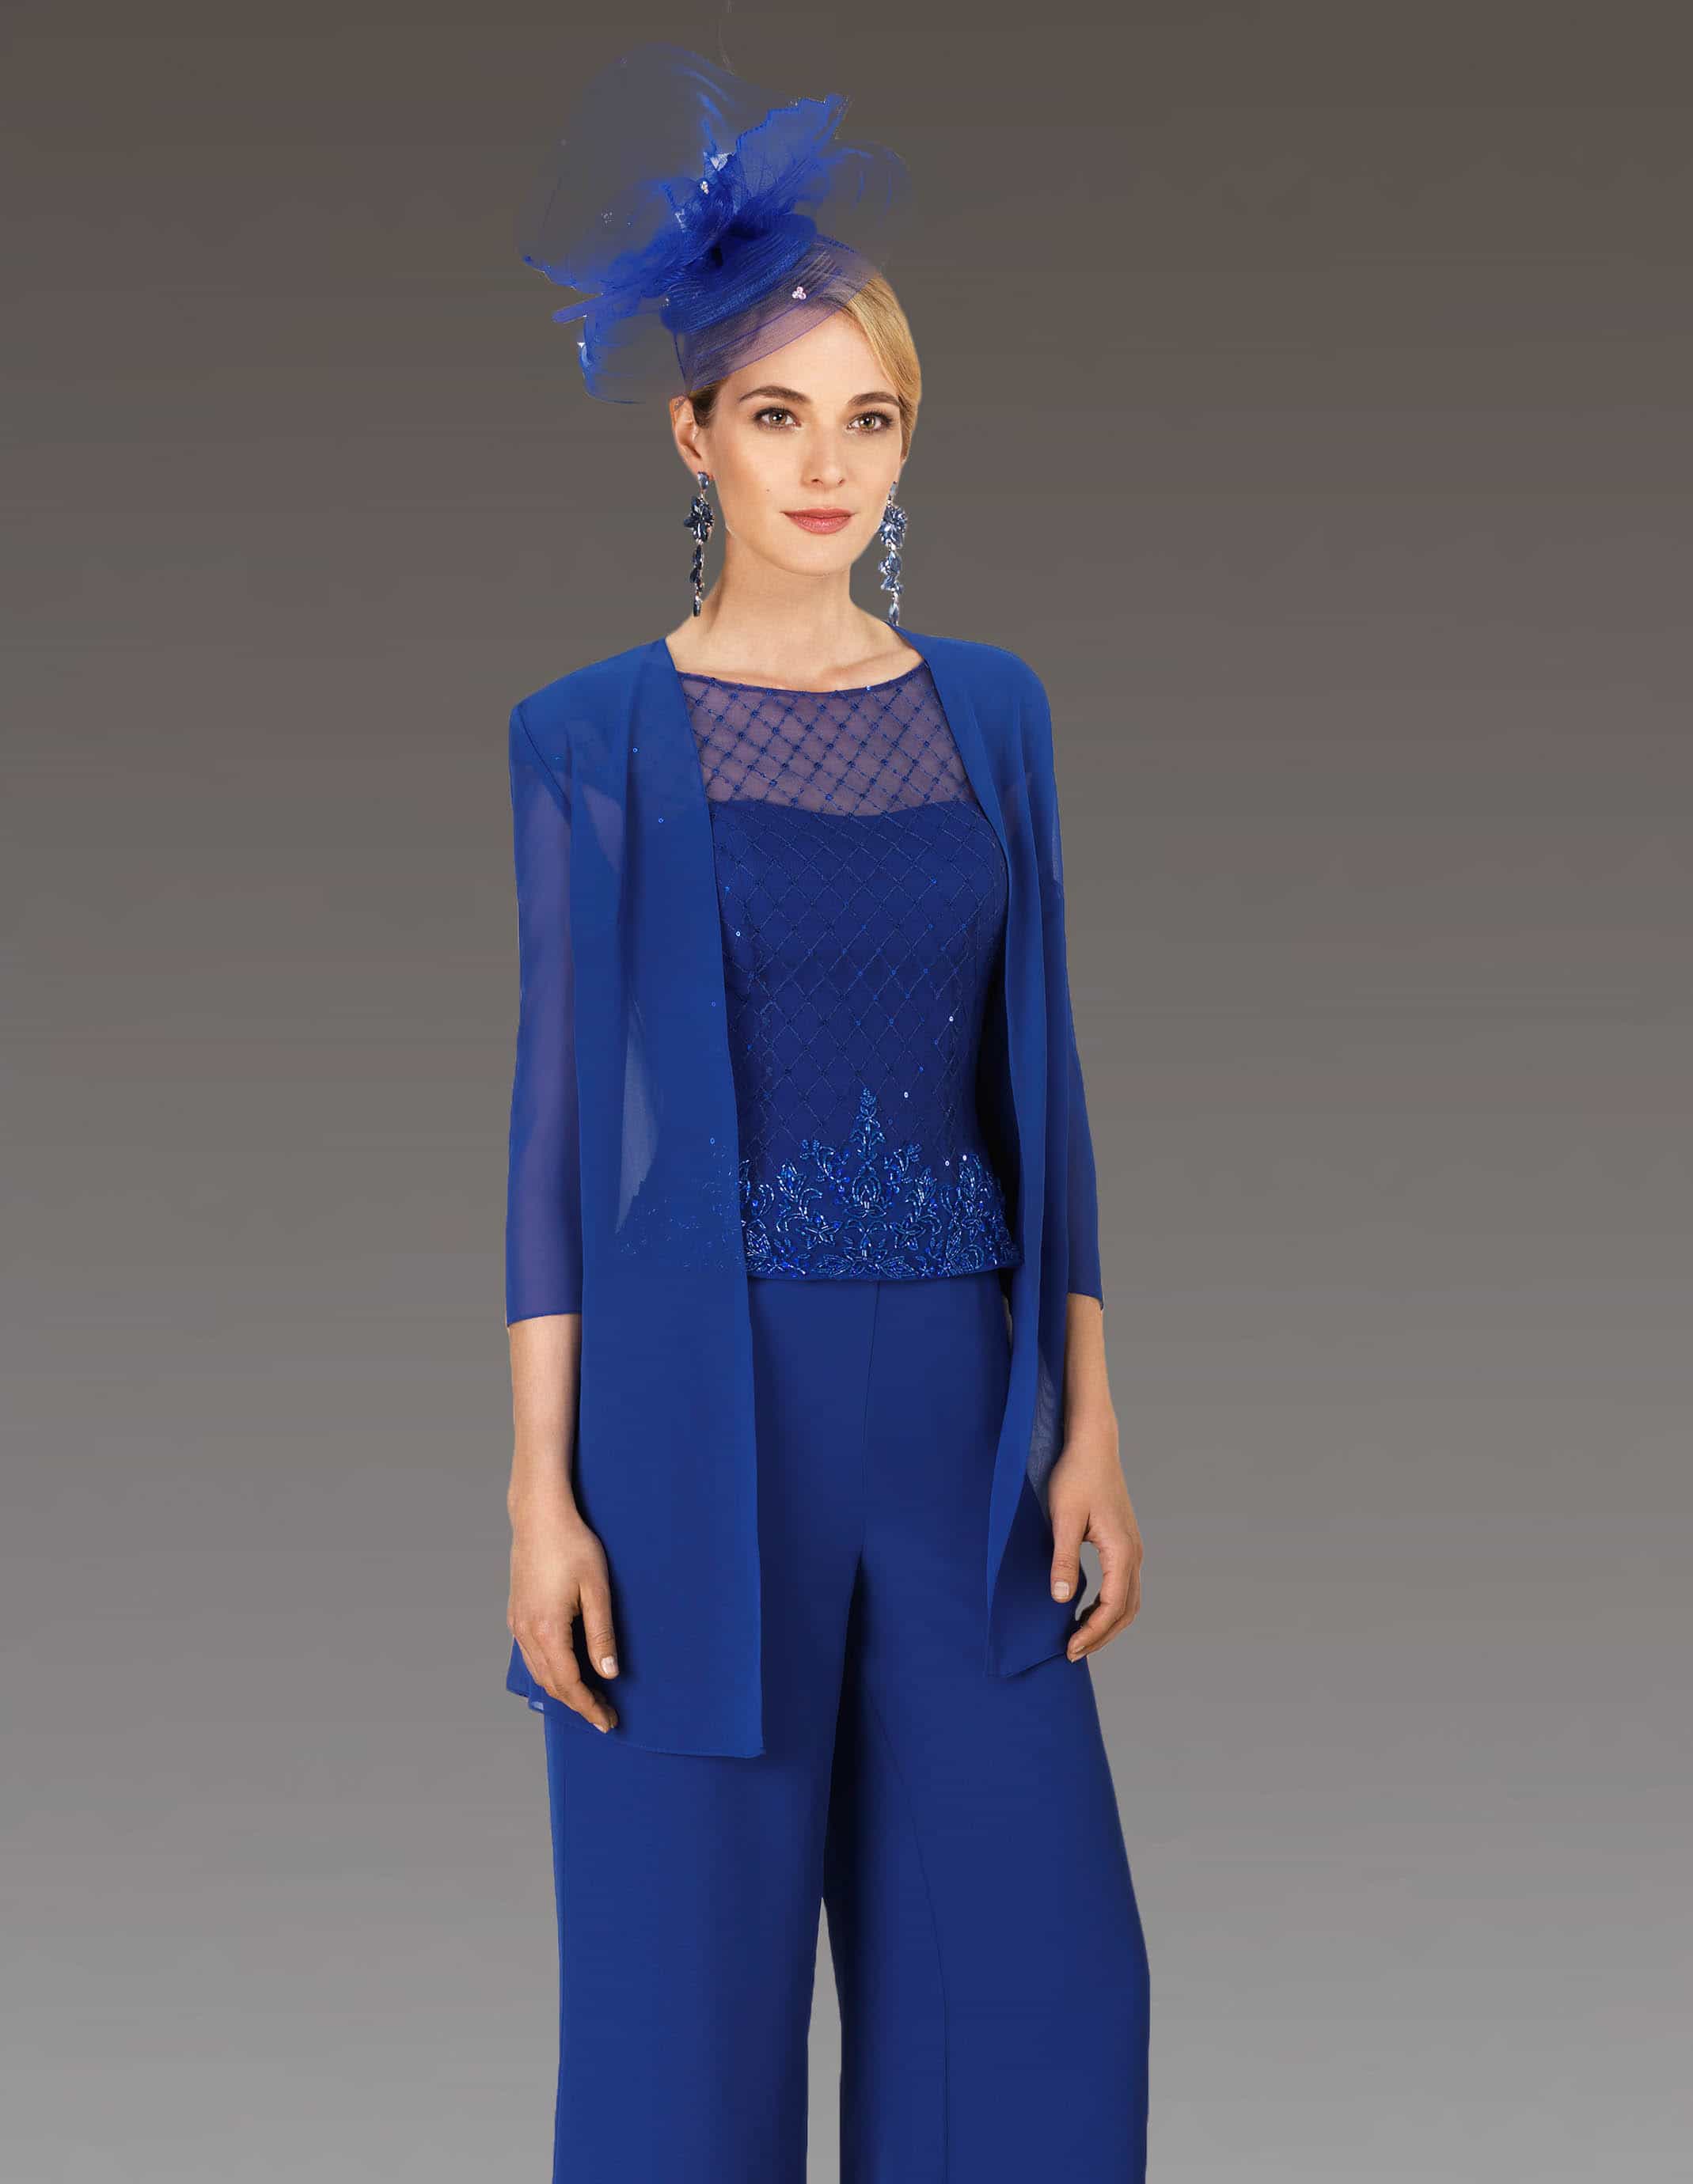 Rosies Closet  Wedding ready girls night out These trouser suits are  Chic Simple  Elegant Featuring Straight trouser legs  Peplum detail  top   Facebook